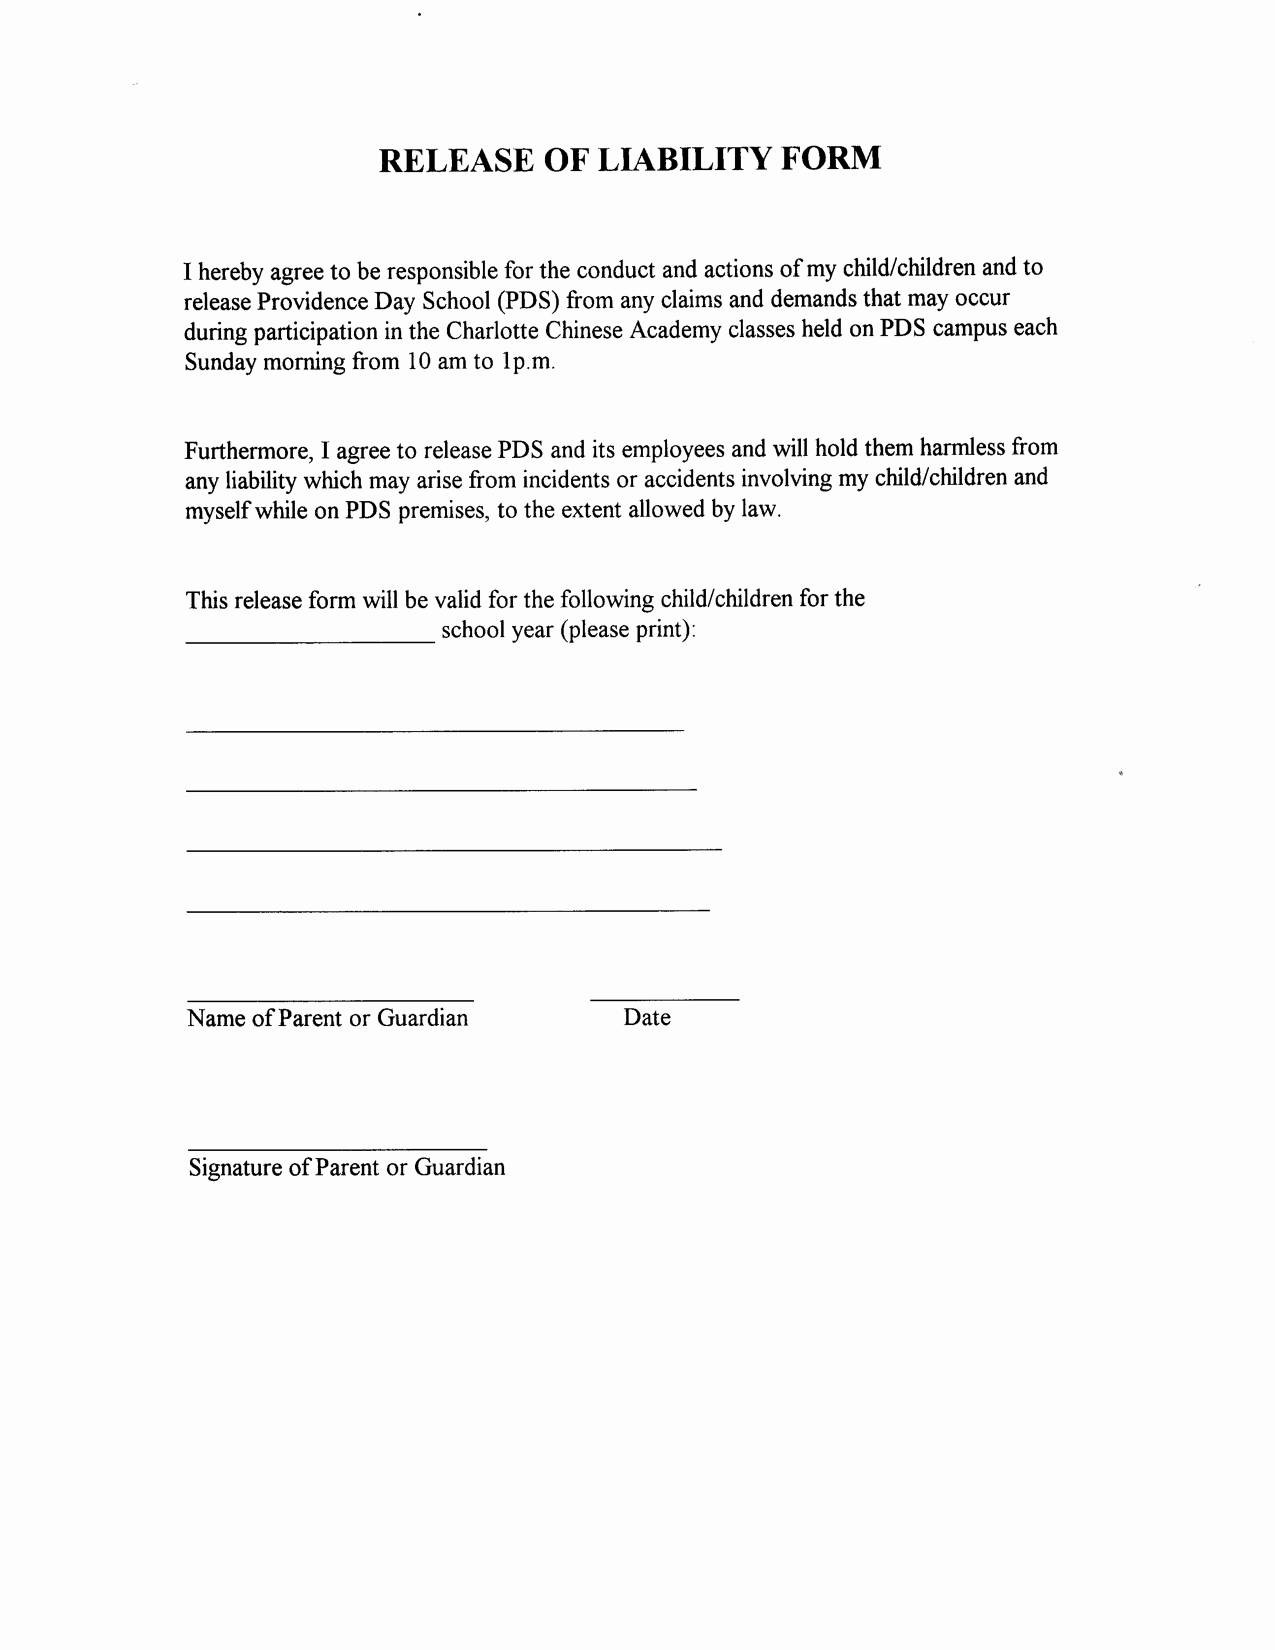 release of liability letter template example-Release form for graphers Best Release From Liability form Template Fresh Sample Waiver Letter 8-f